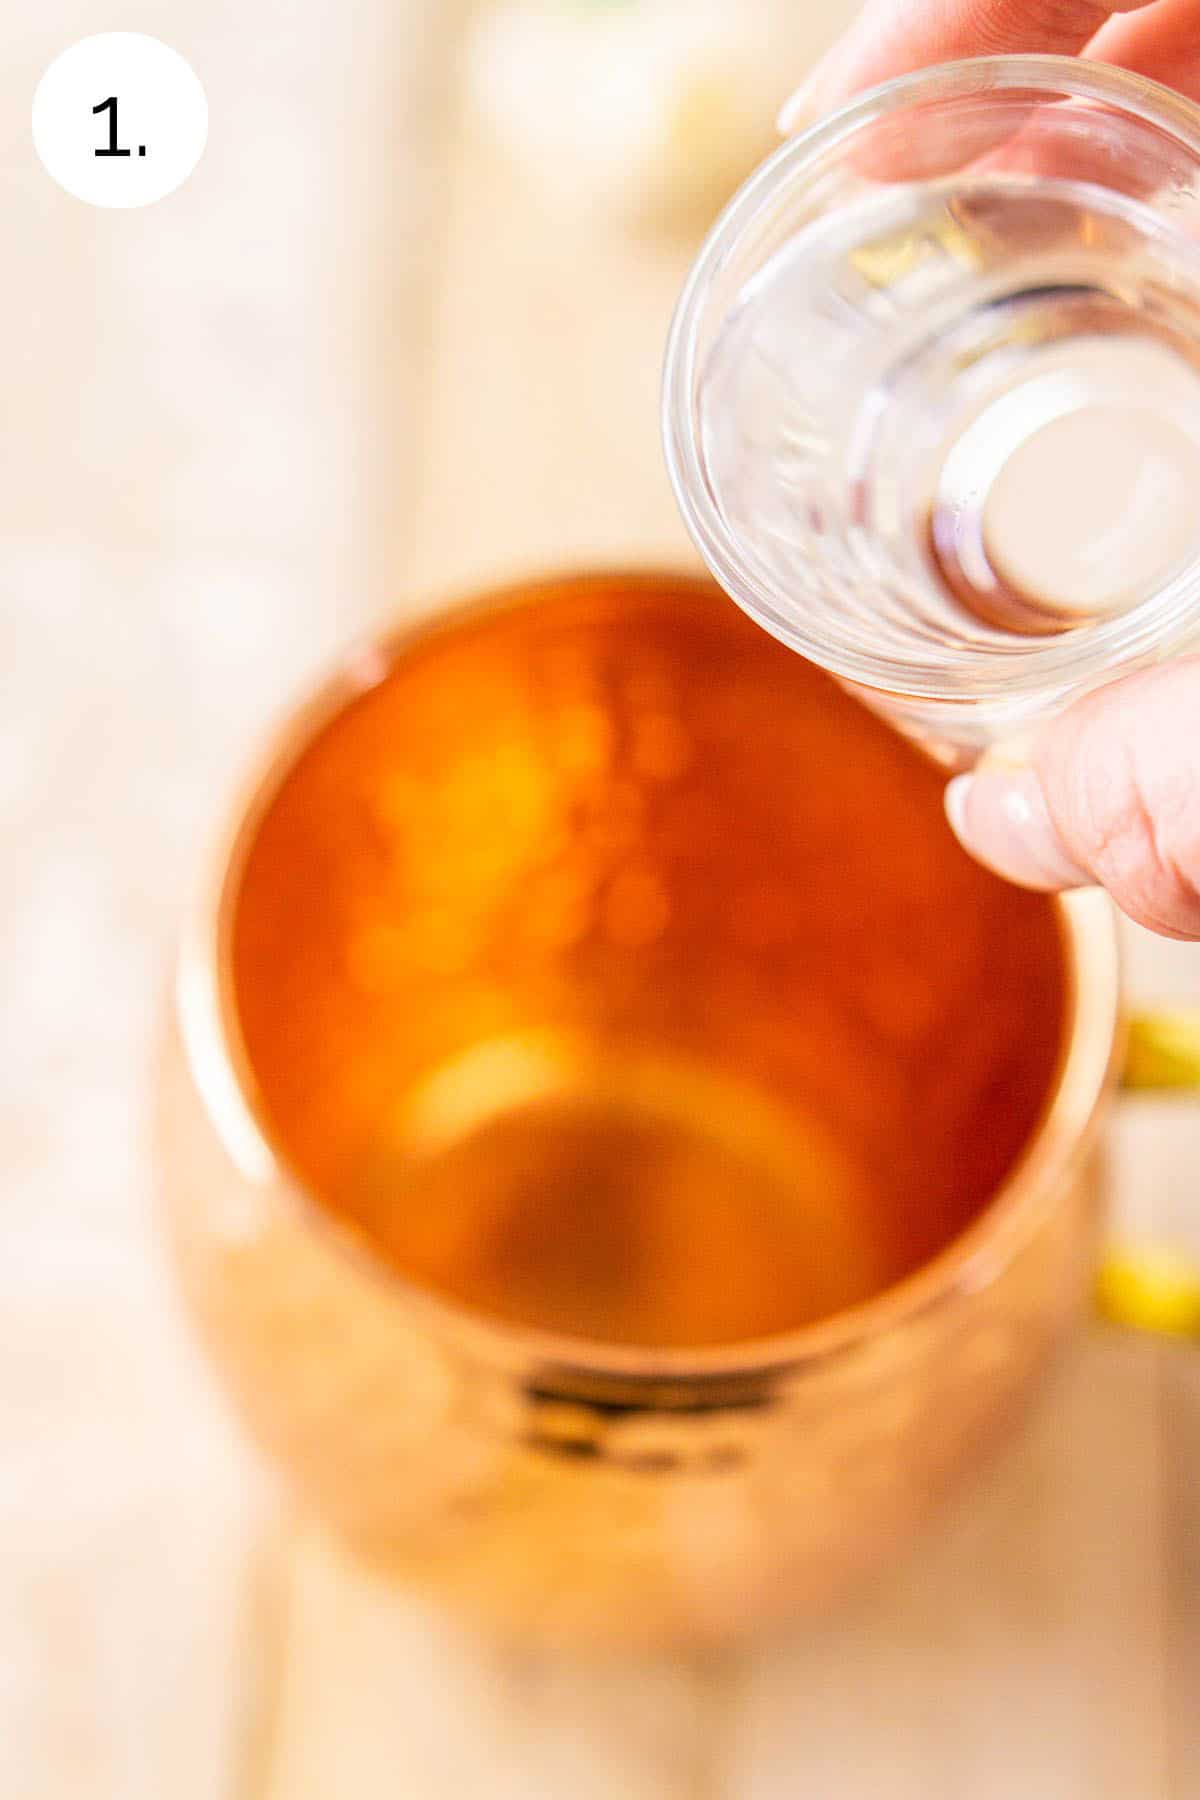 A hand pouring a shot of gin into a copper mug on a cream-colored wooden board.